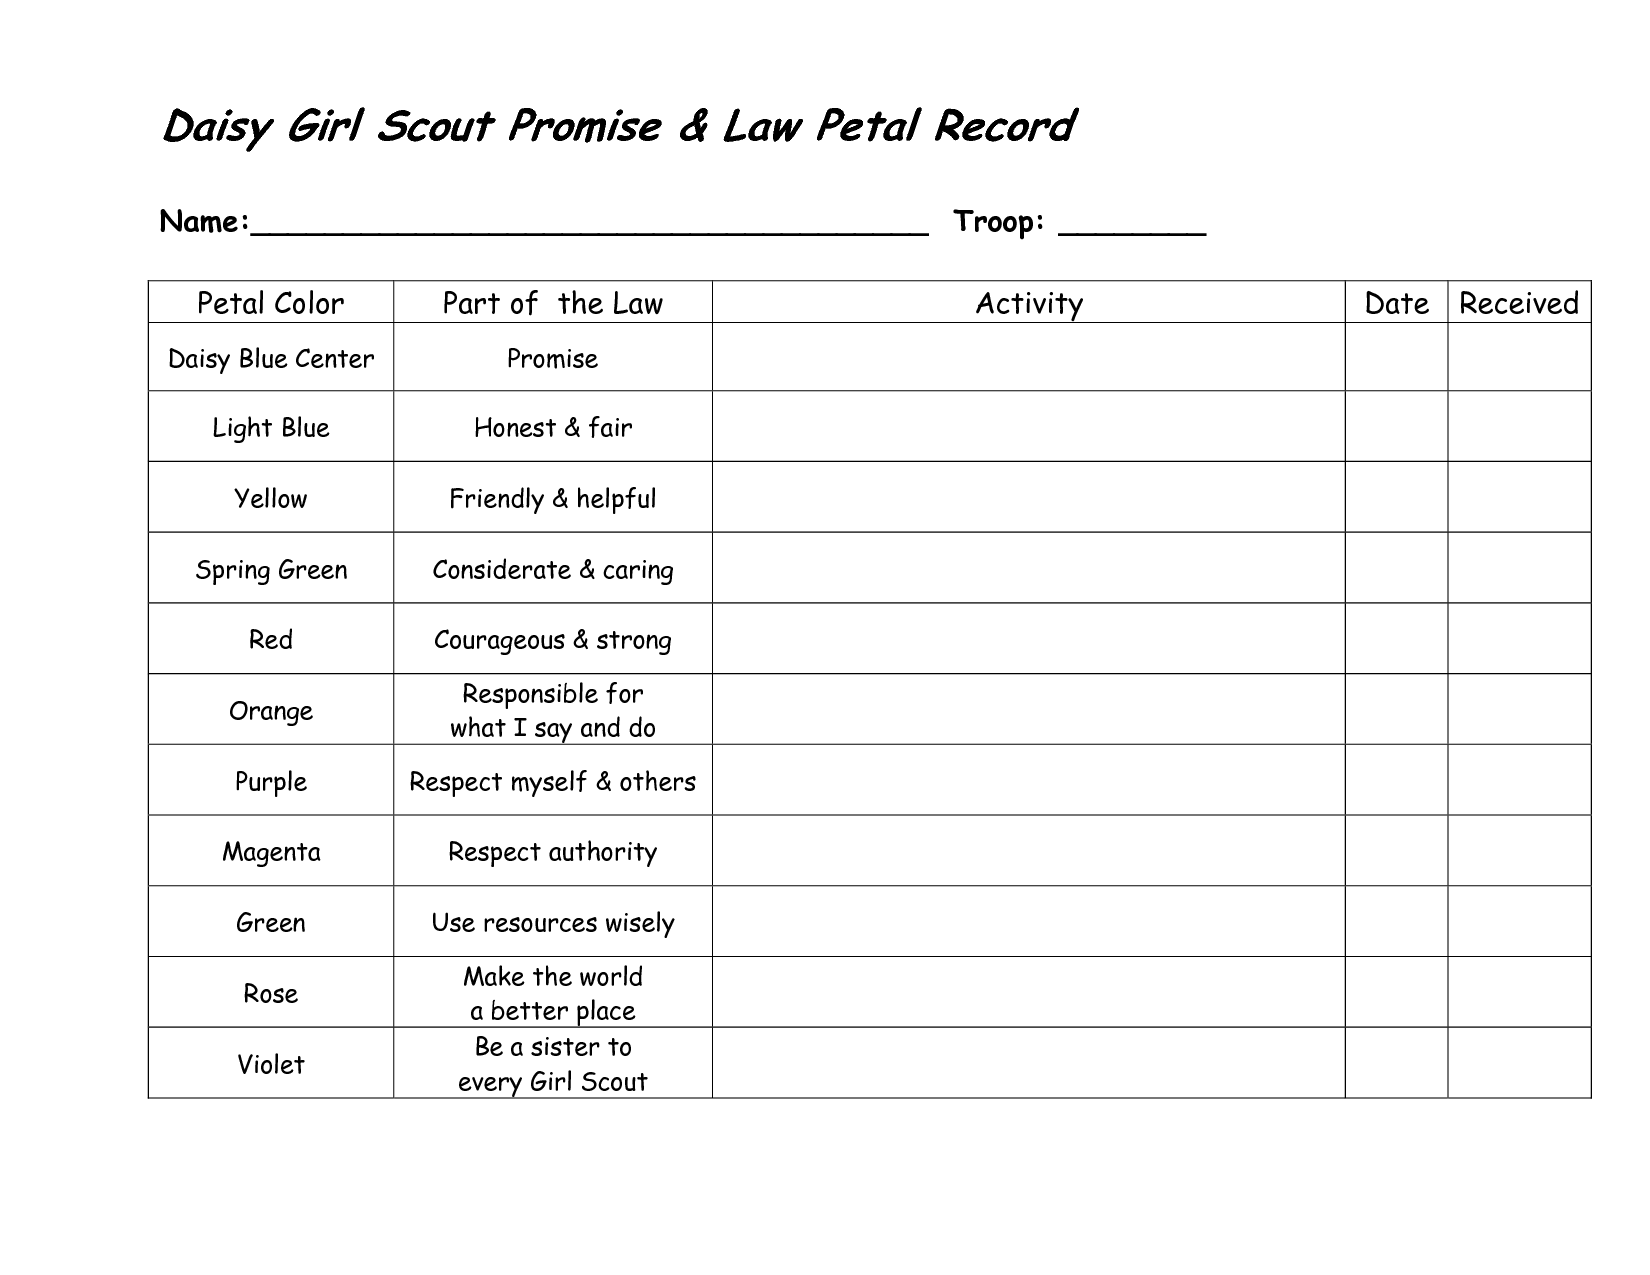 girl scout journey tracking form | Girl Scout Daisy Award Record ...